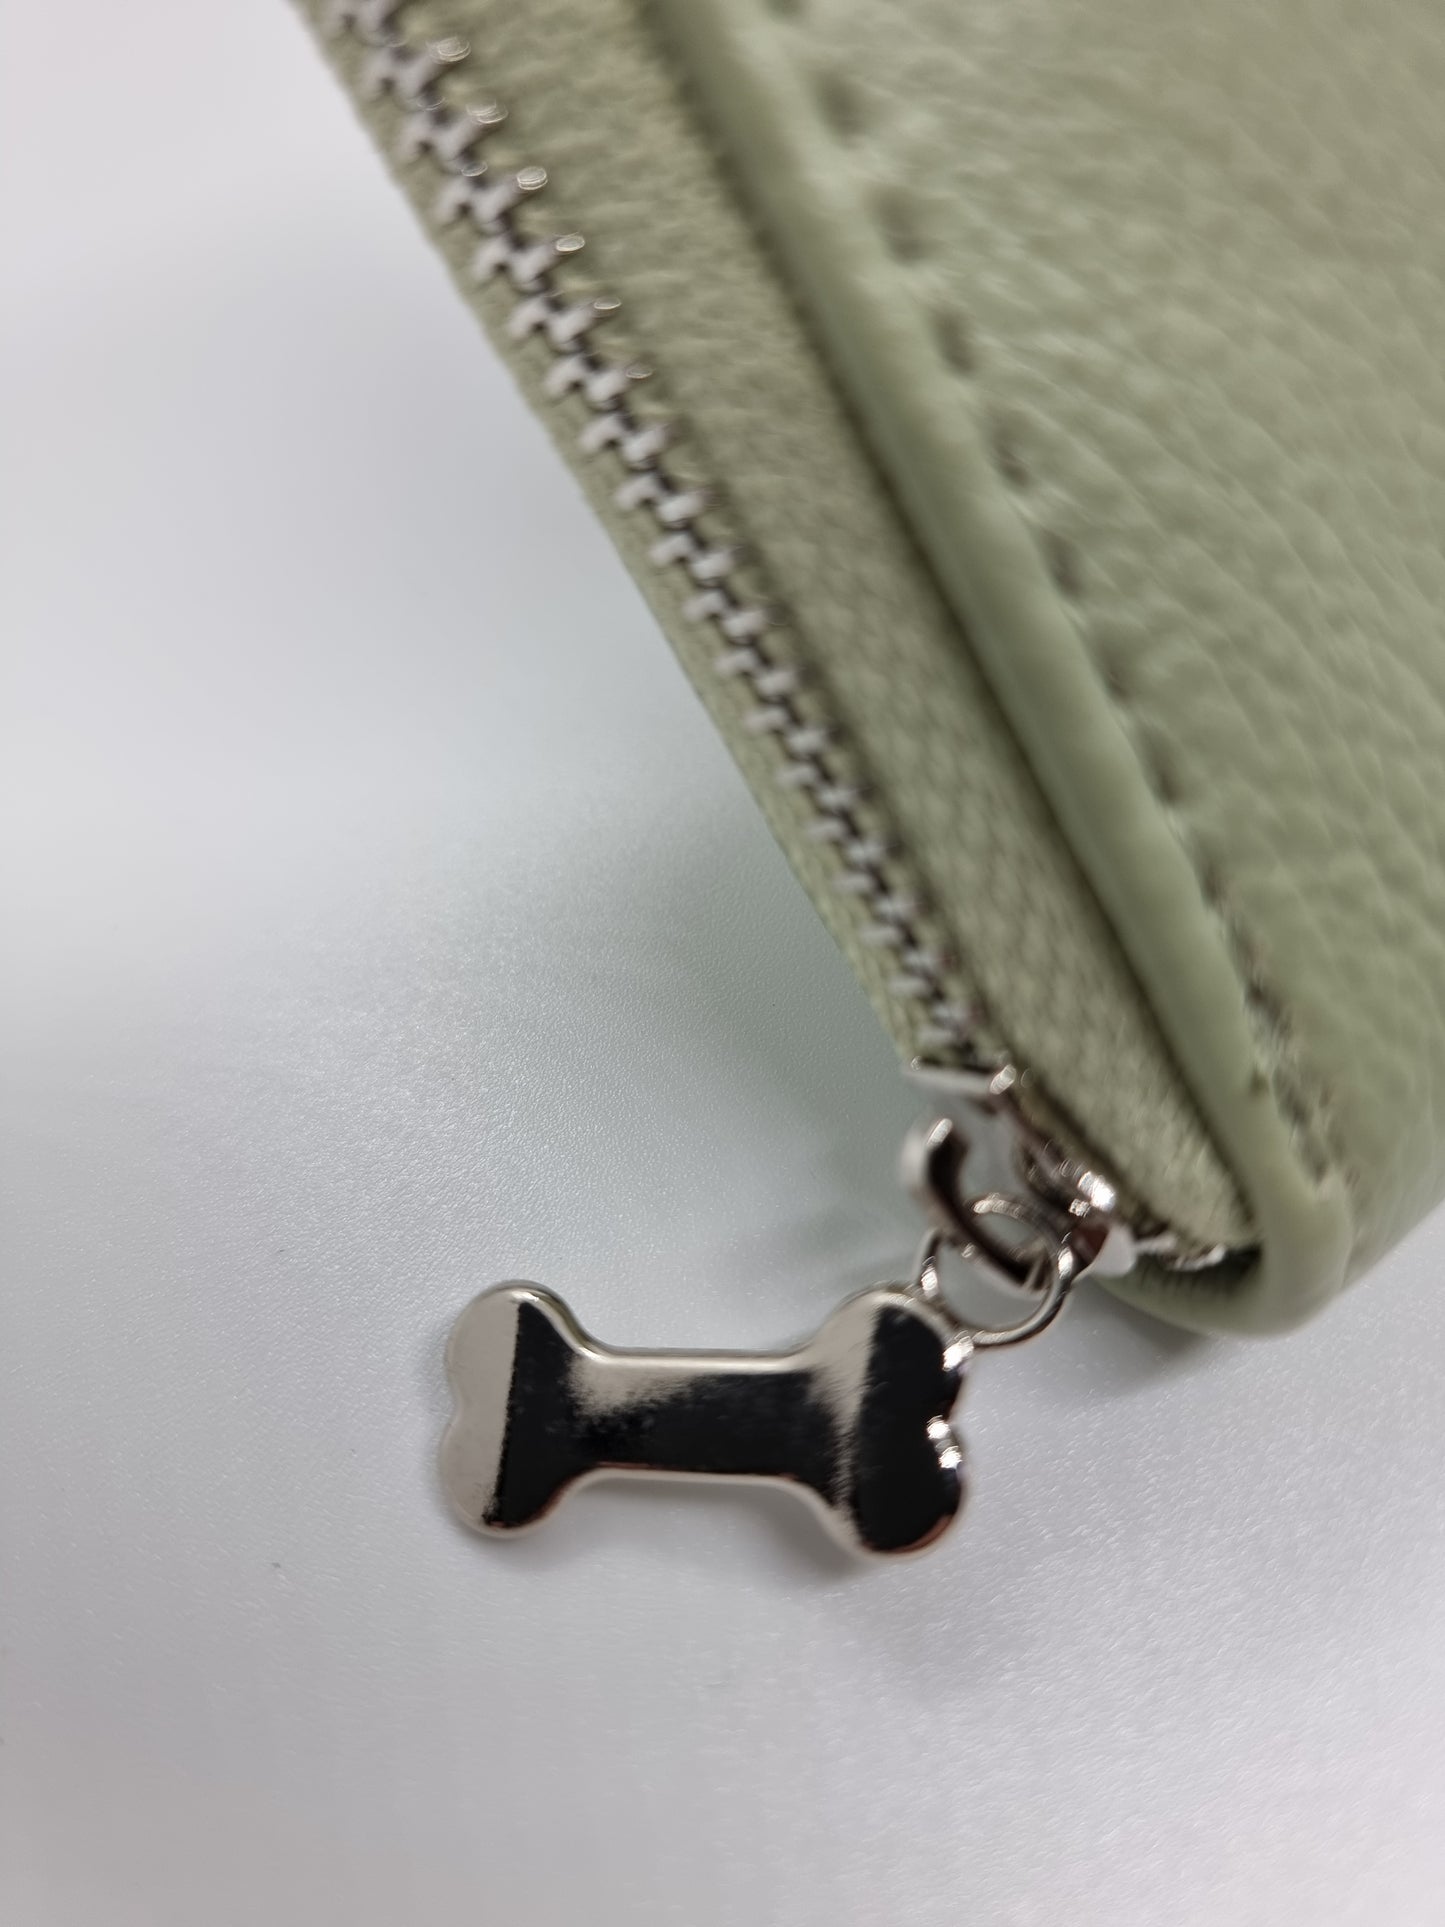 Scotty dog purse with FREE DELIVERY